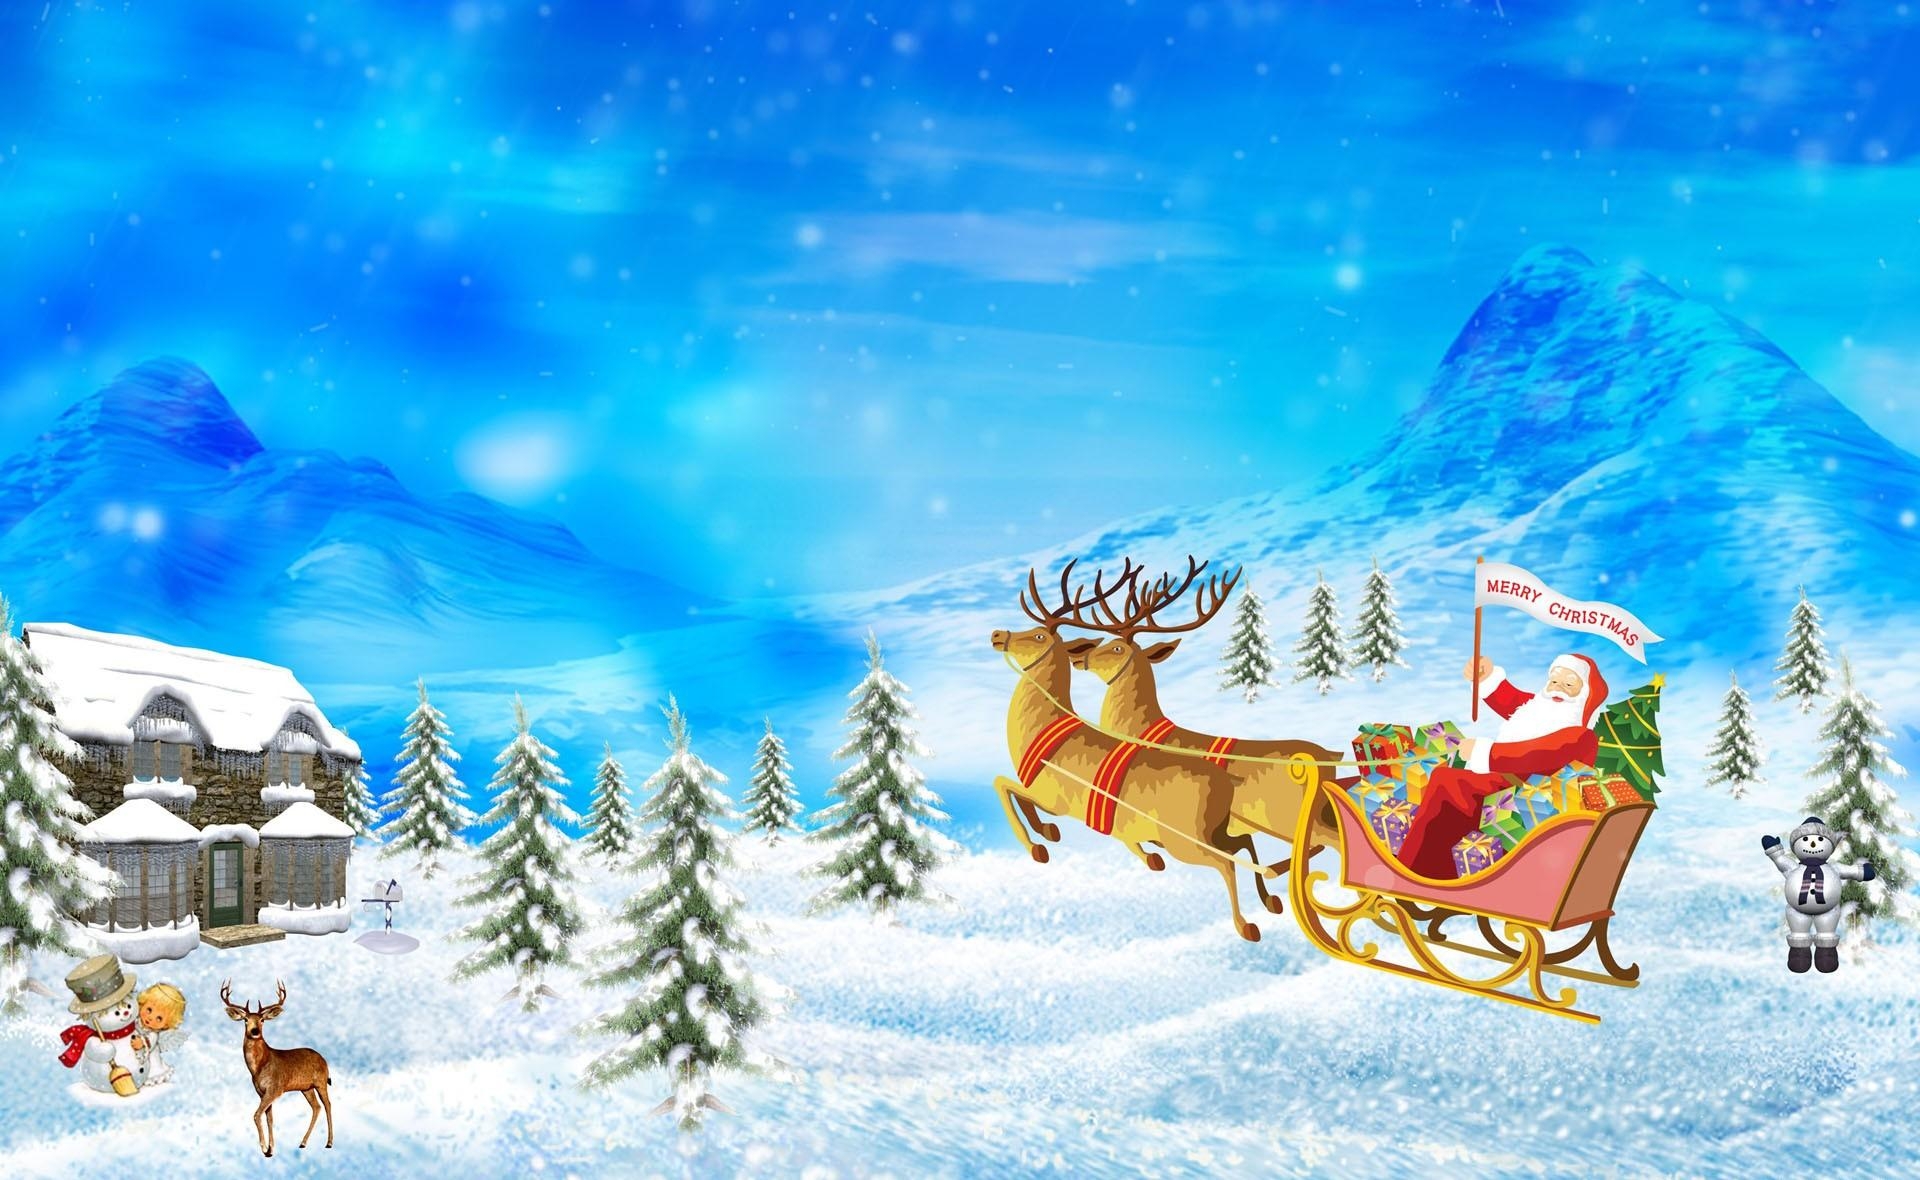 holidays, mountains, santa claus, deers, christmas, holiday, house, sleigh, sledge, presents, gifts